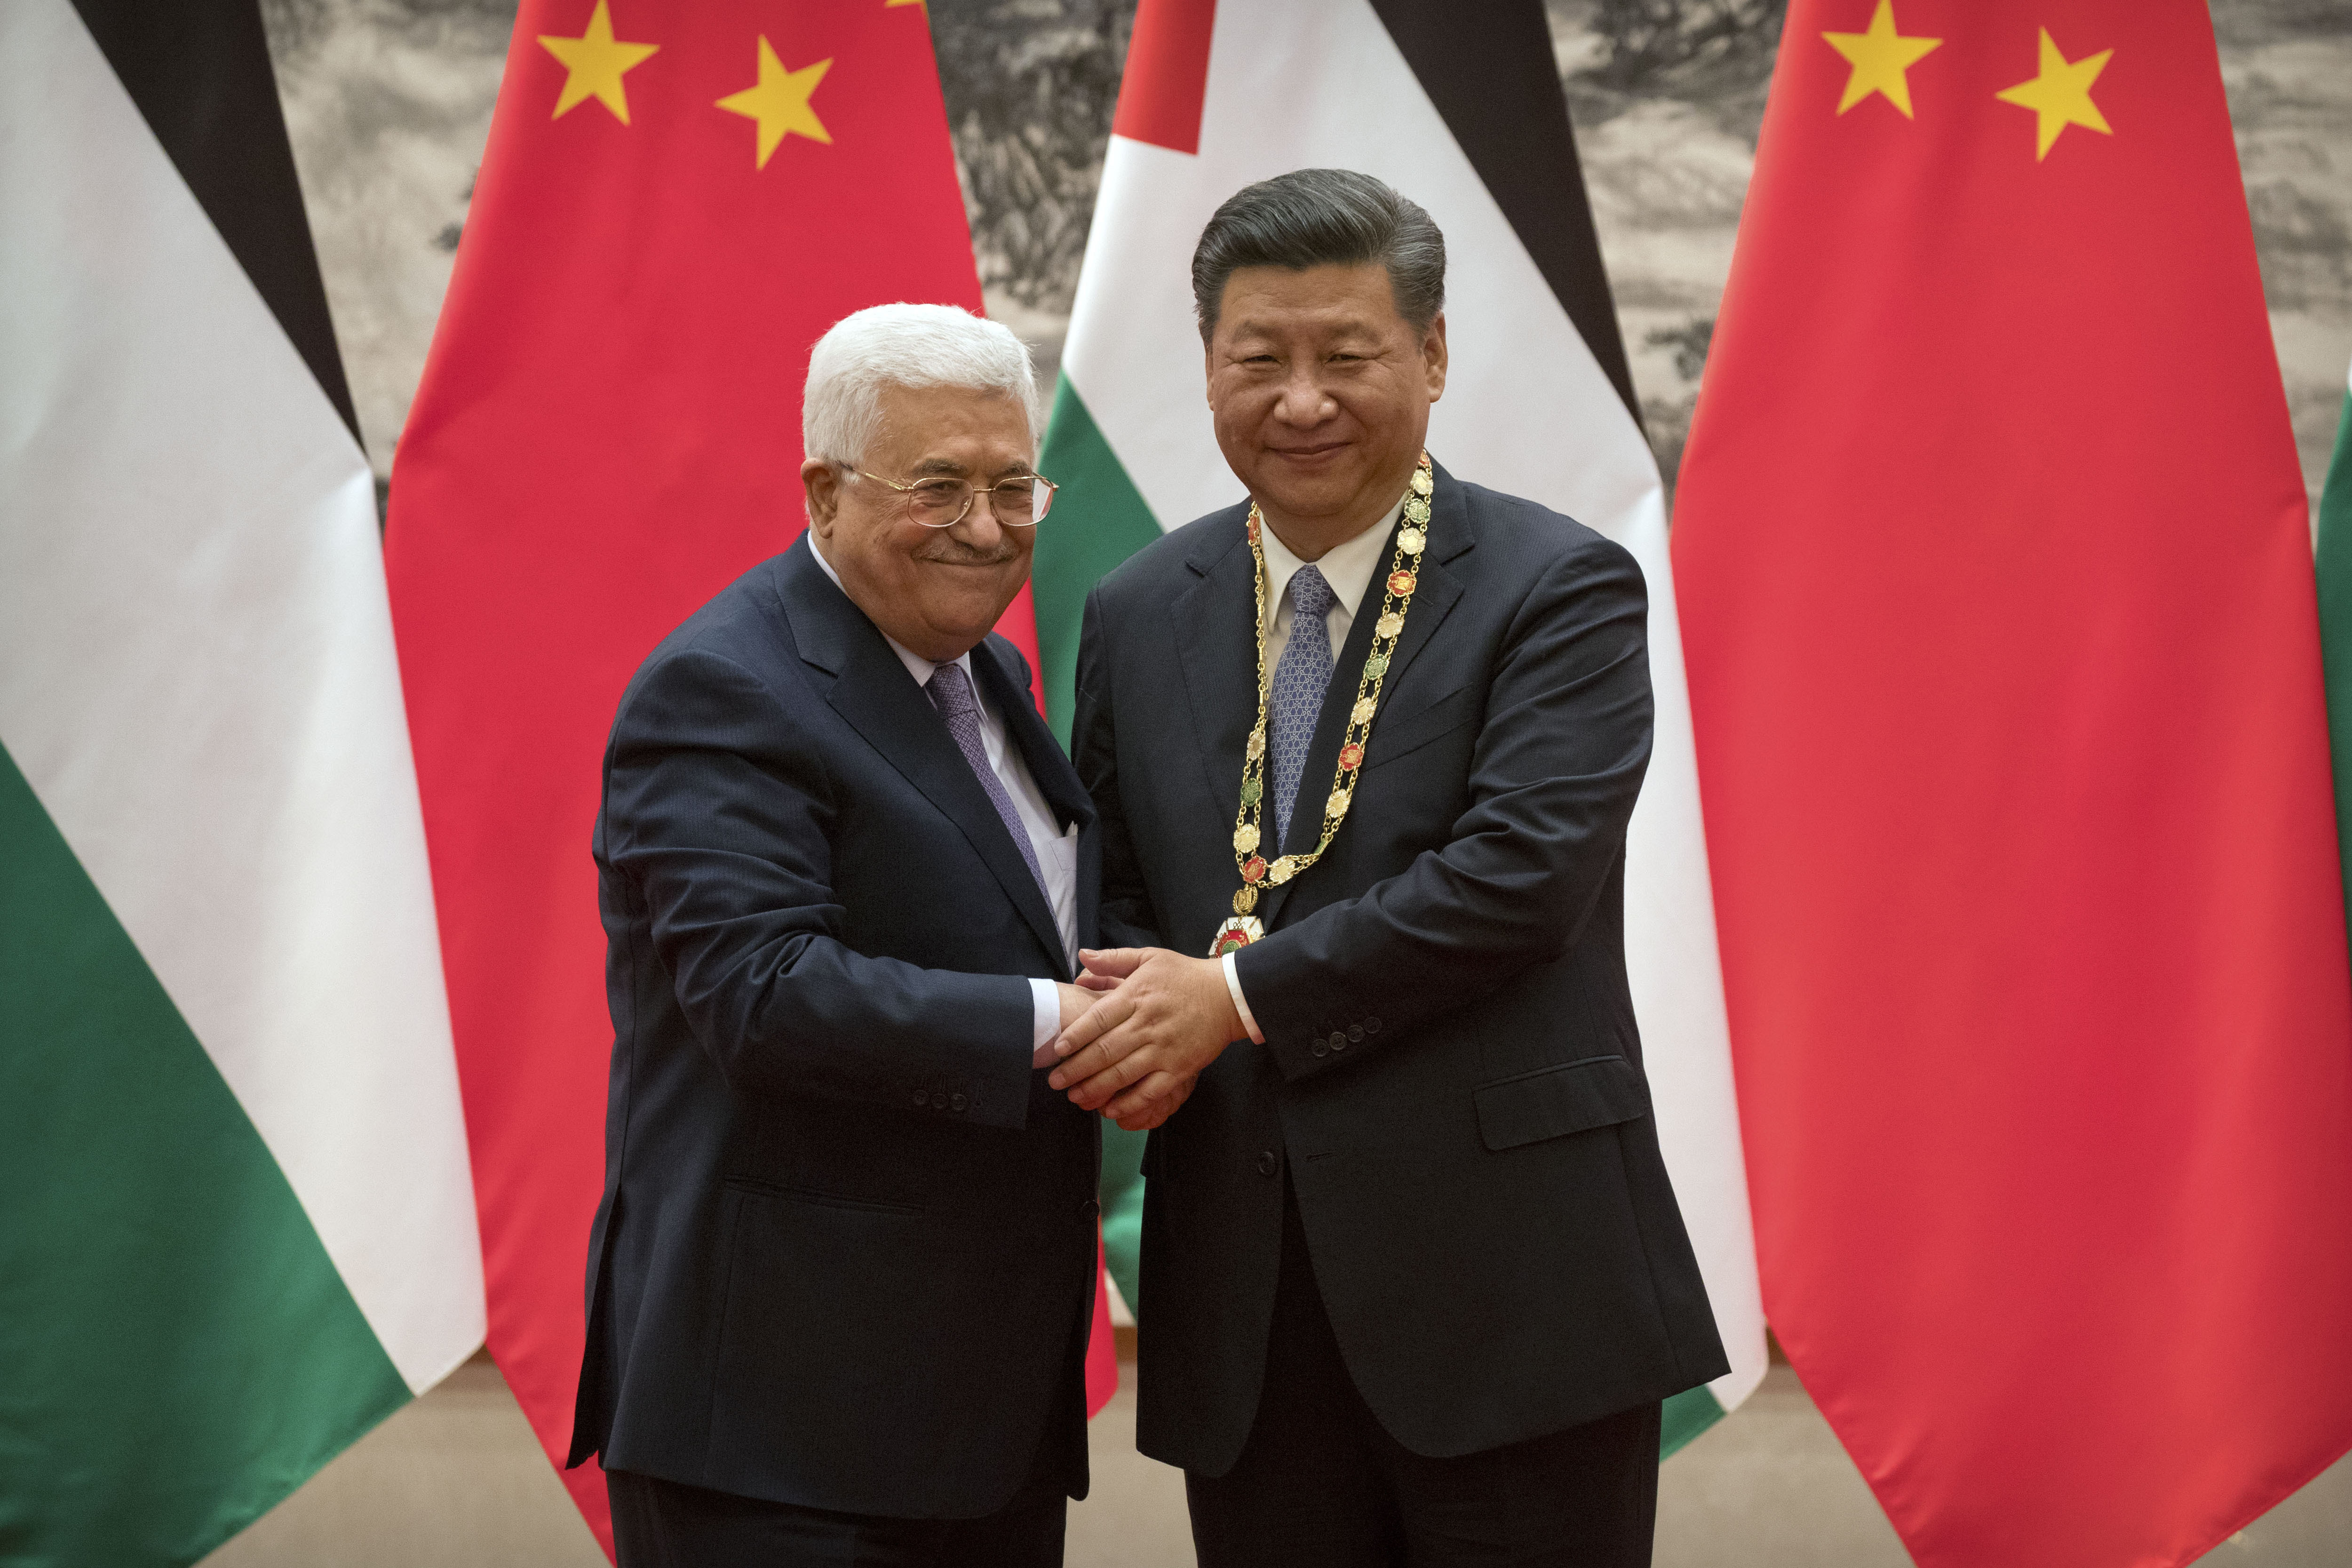 Palestinian President Mahmoud Abbas, left, pose for a photo after presenting a medallion to Chinese President Xi Jinping, right, during a signing ceremony at the Great Hall of the People in Beijing, Tuesday, July 18, 2017. (AP Photo/Mark Schiefelbein, Pool)